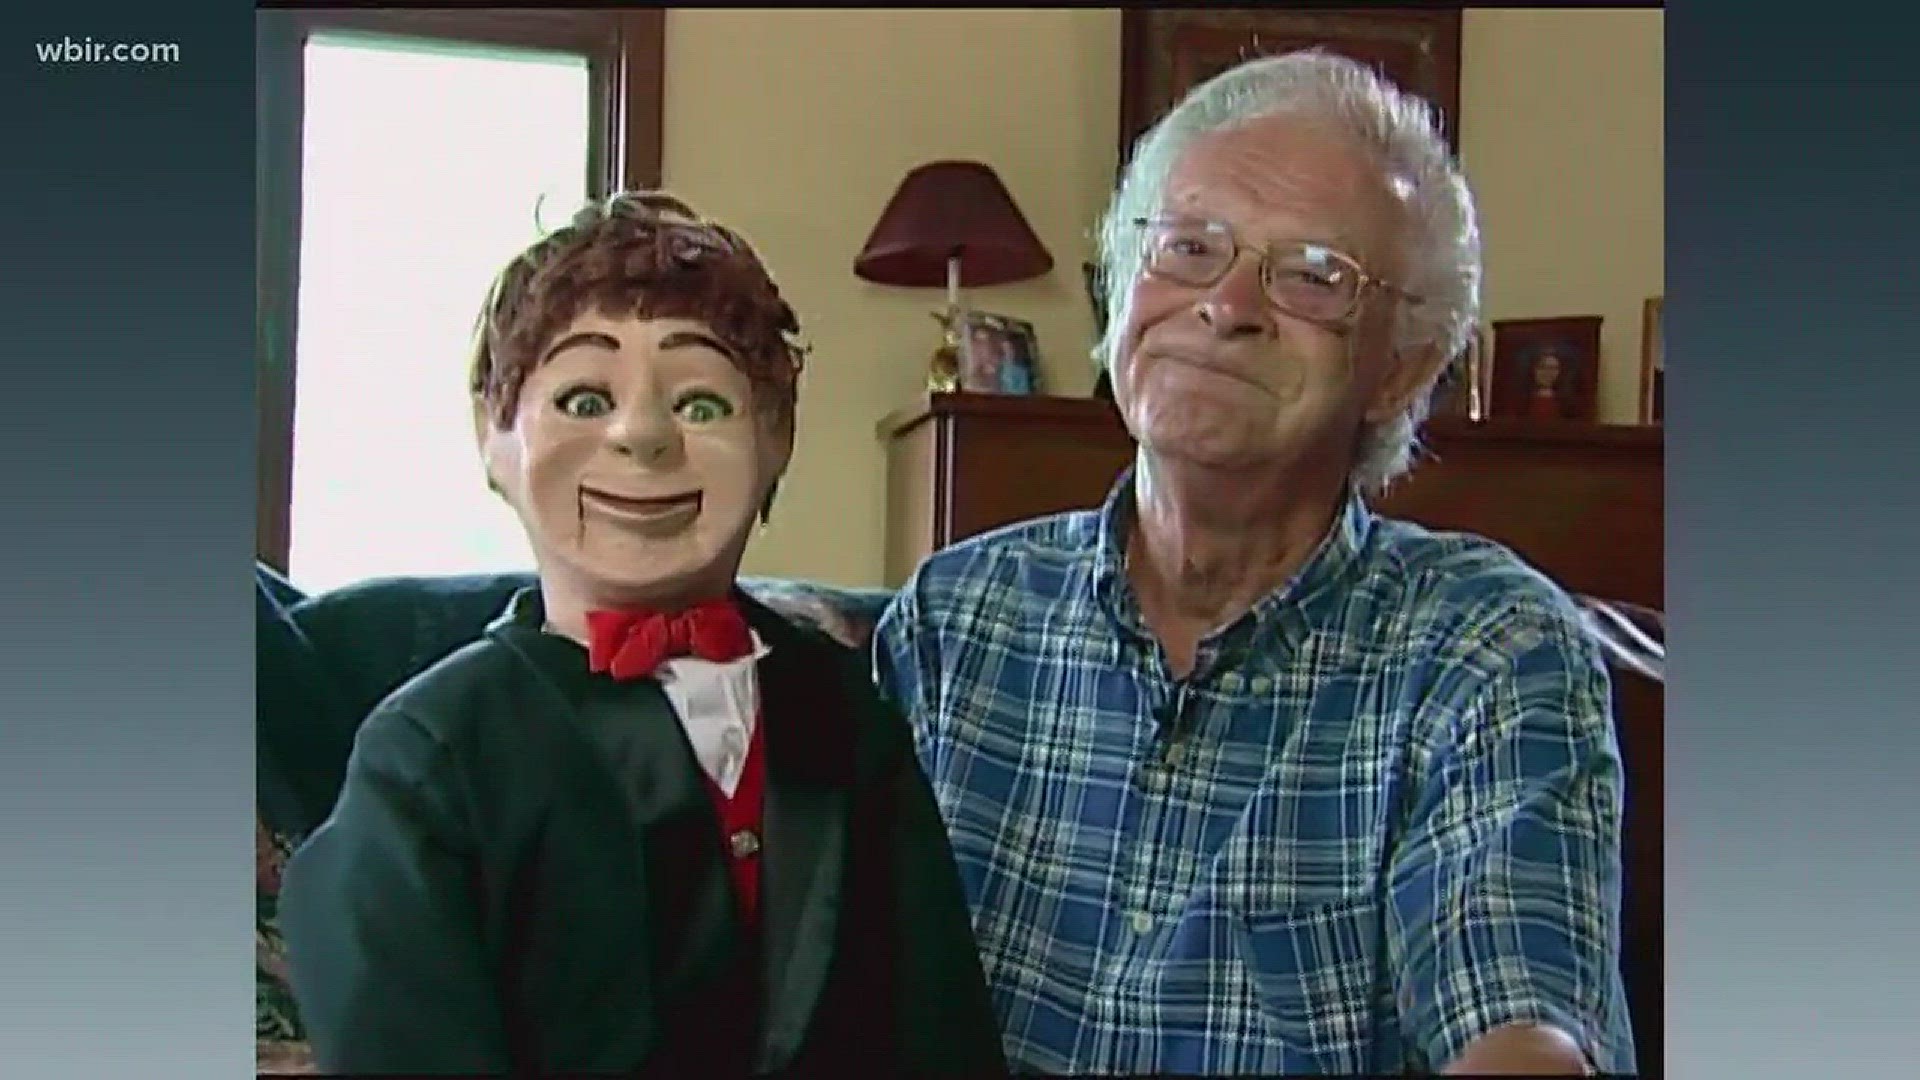 Remembering ventriloquist Alex Houston who died October 28, 2017. The North Carolina native performed with celebrities like Dolly Parton.